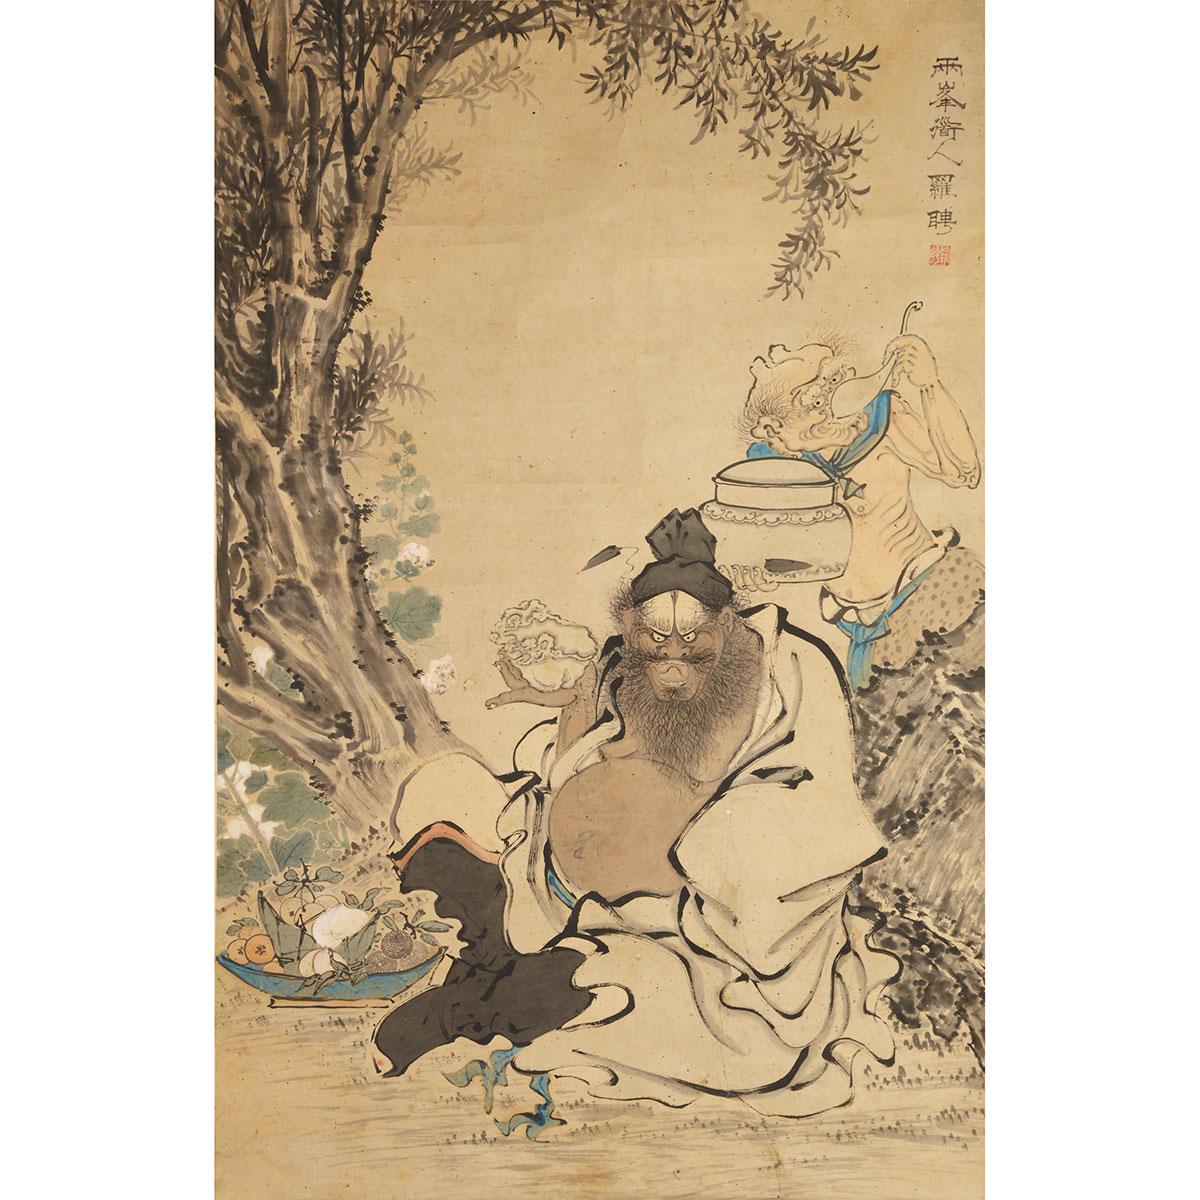 Attributed to Luo Pin (1733-1799)